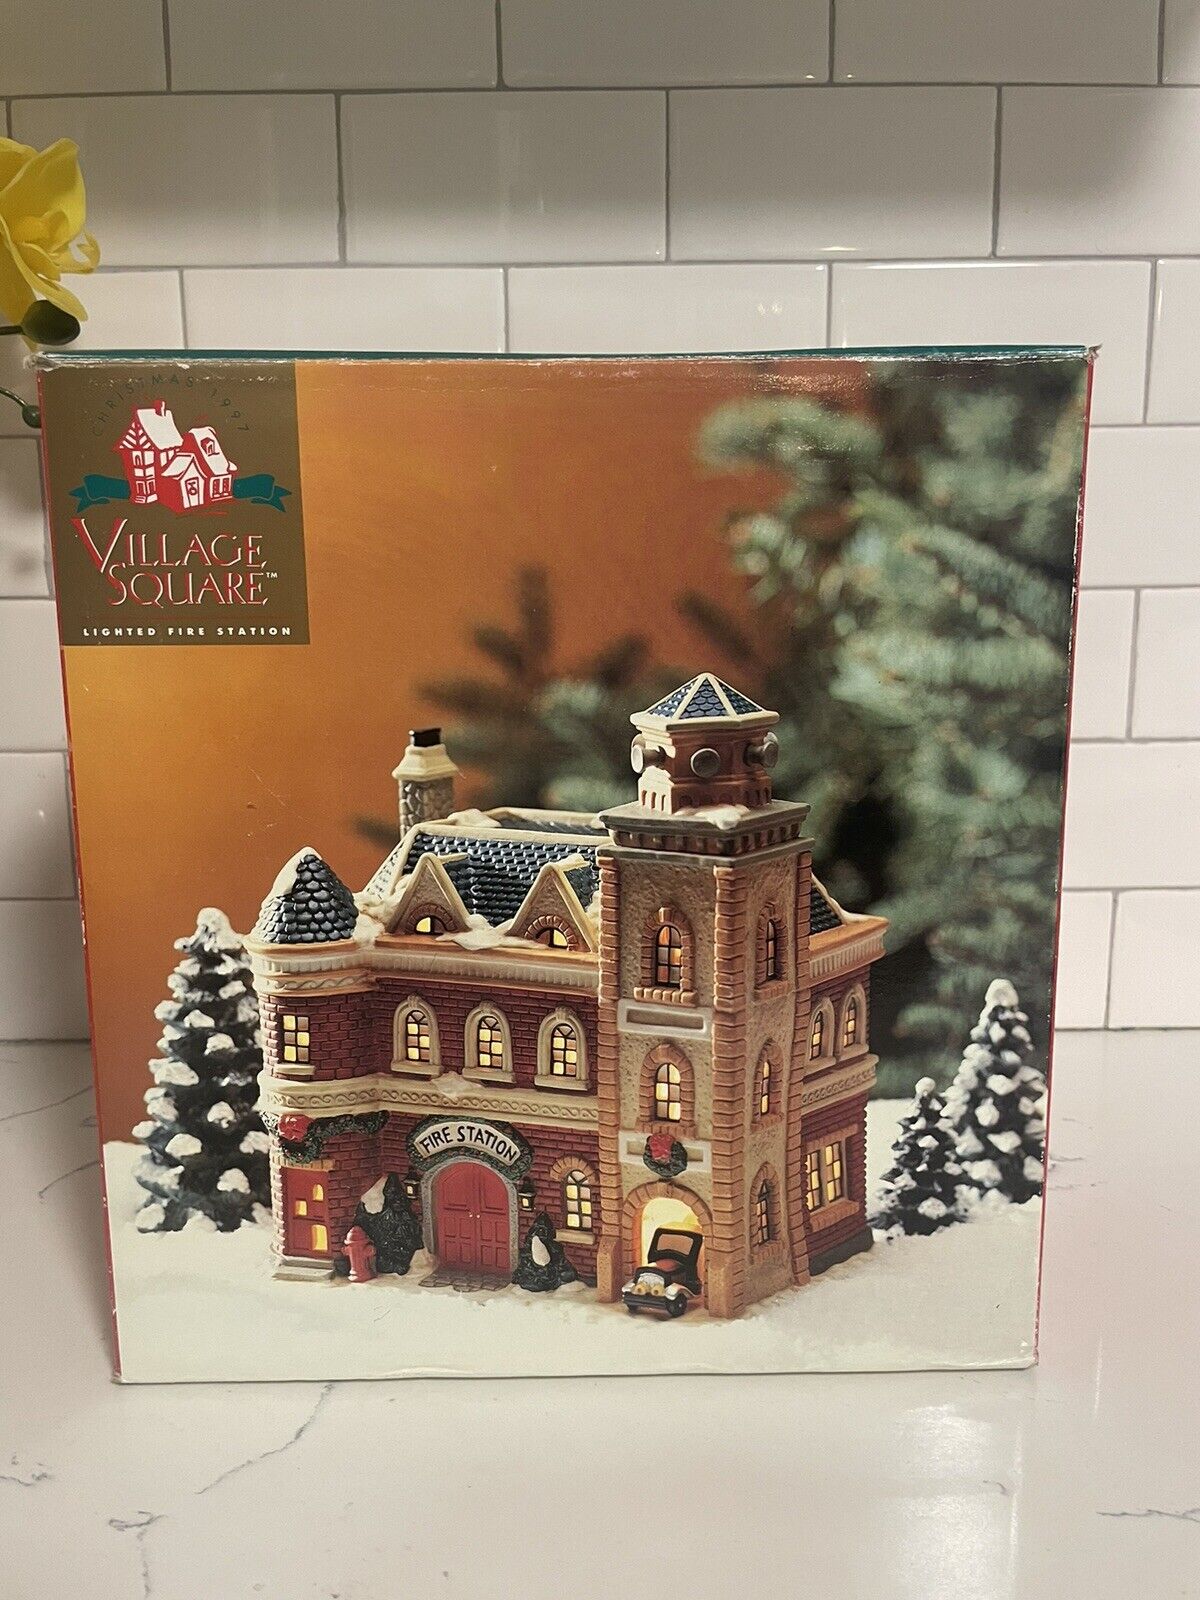 VTG 1997-Village Square Lighted Fire Station, Christmas-Tested-Excellent Cond